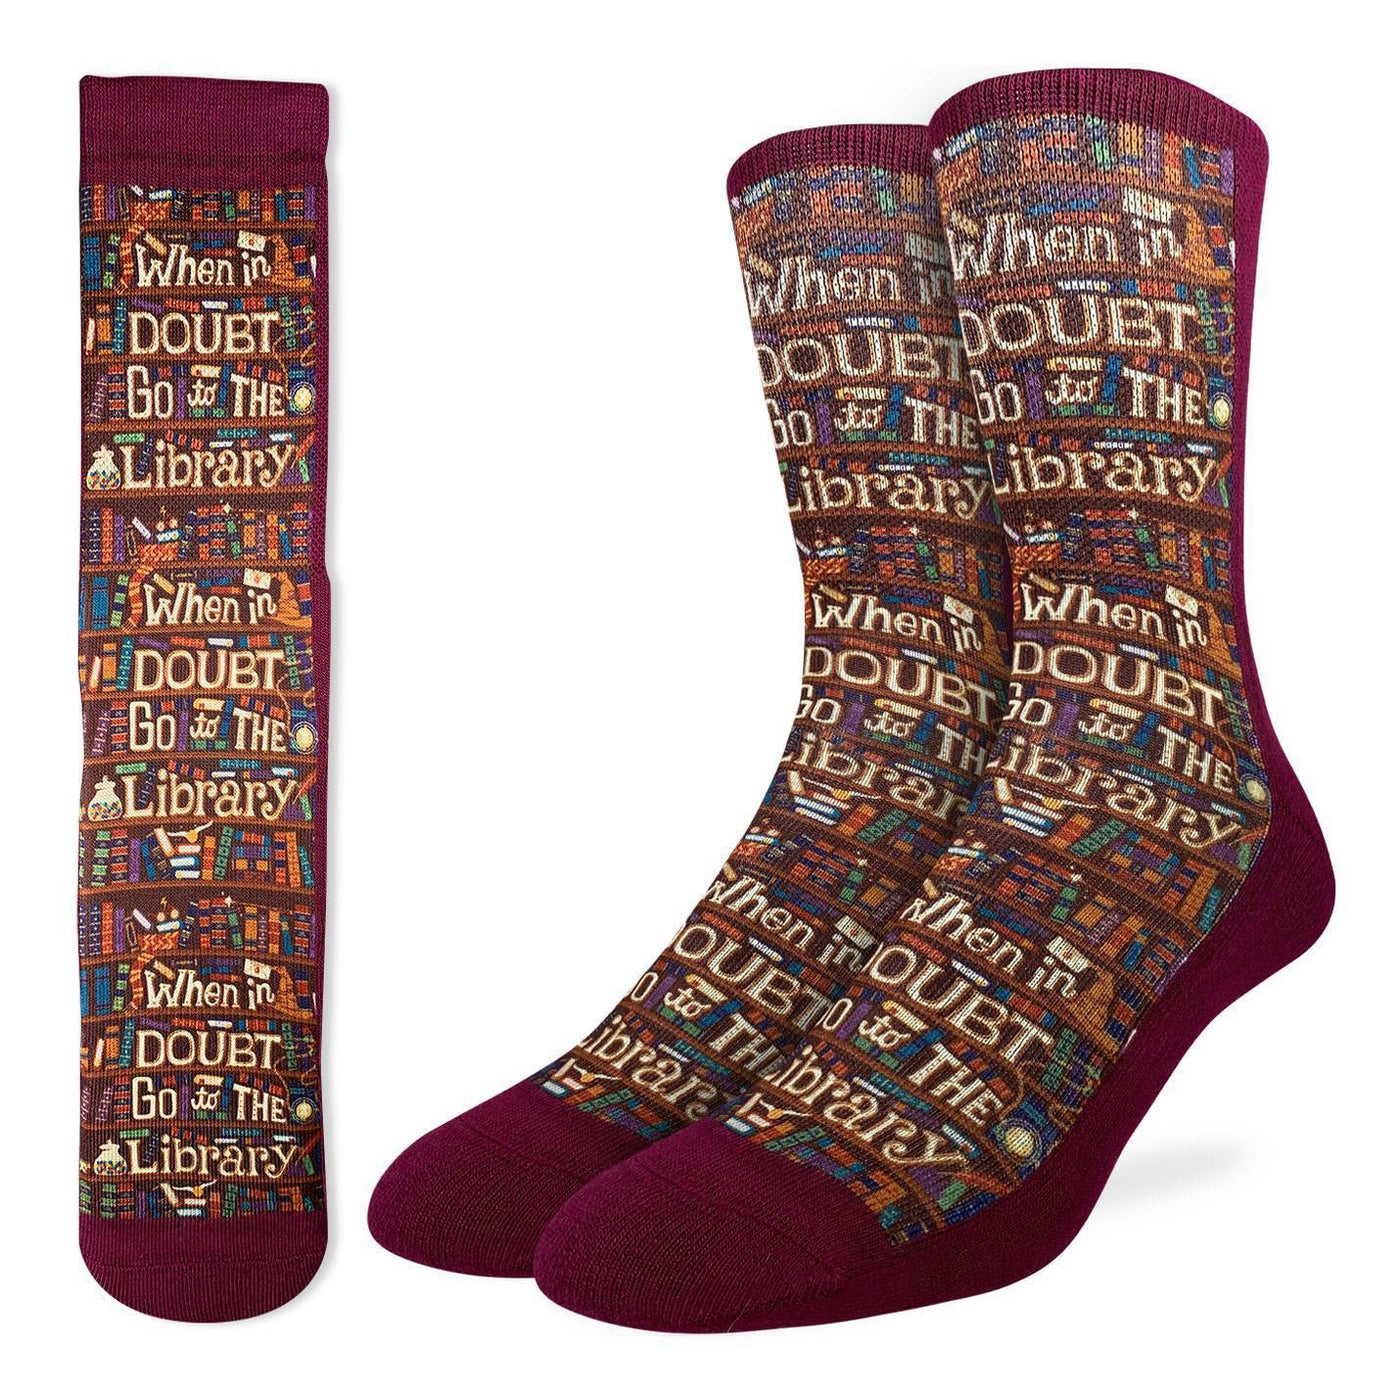 "Go to the Library" Crew Socks by Good Luck Sock - Large